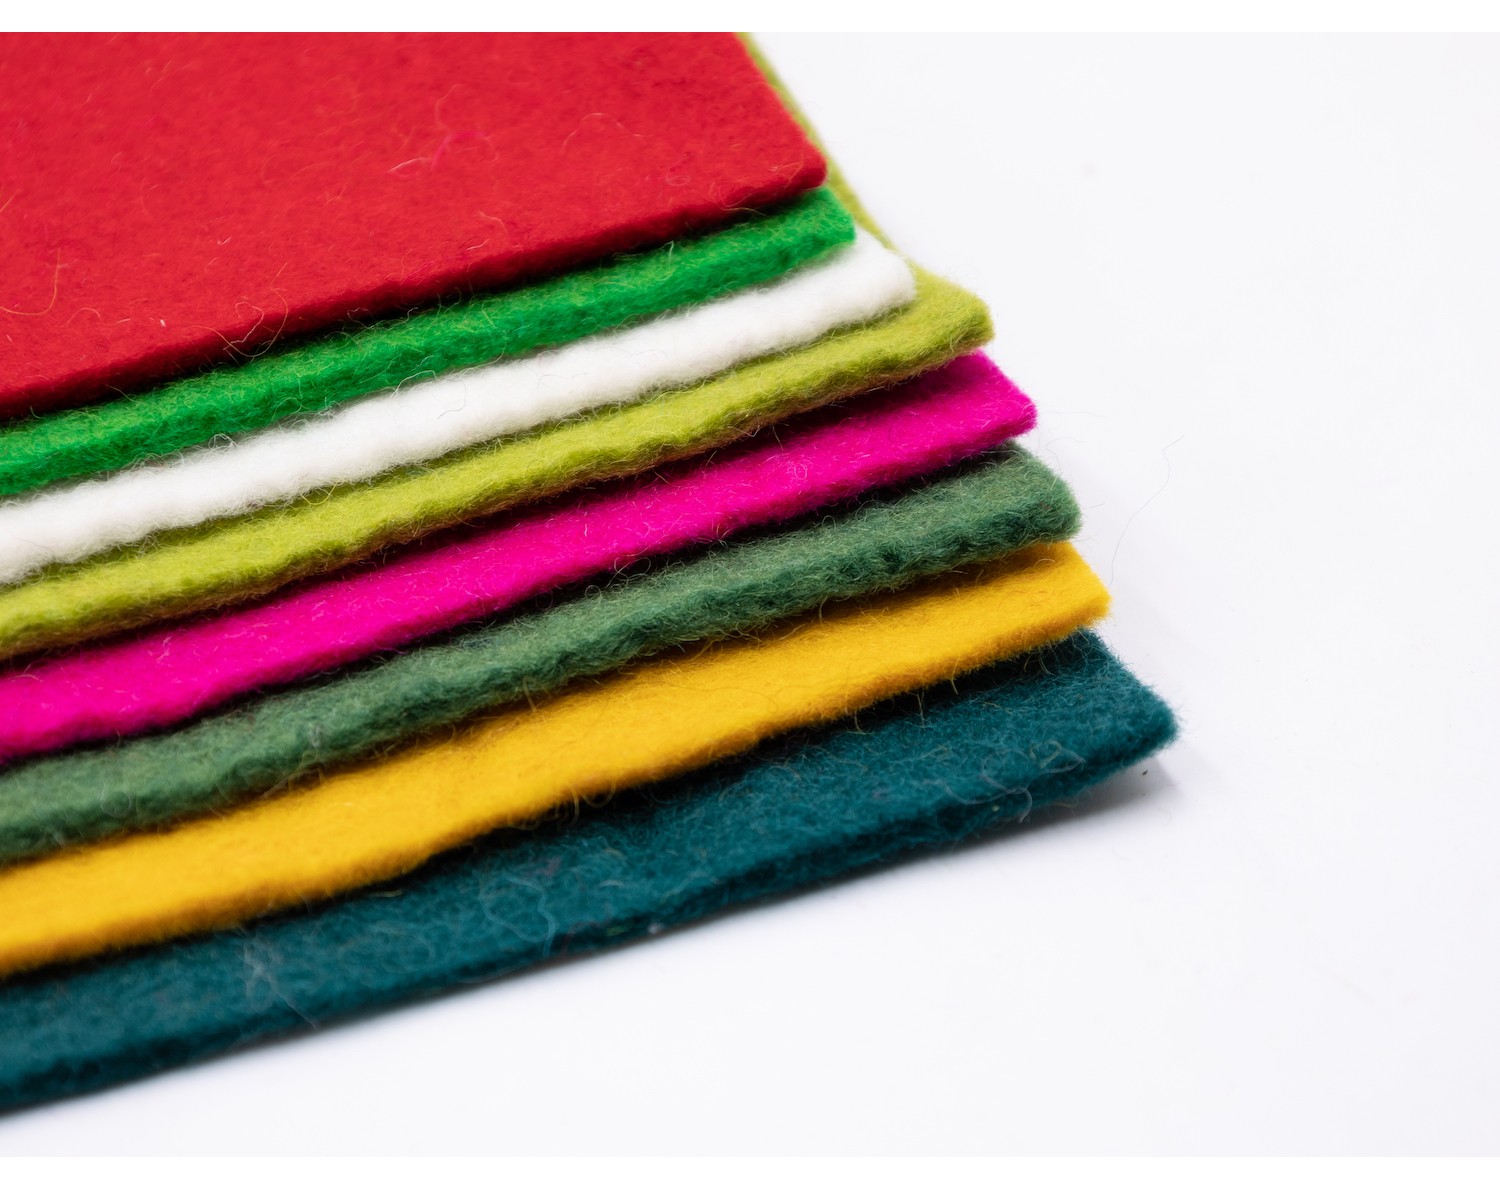 Felt Sheets for Sale and Wholesale